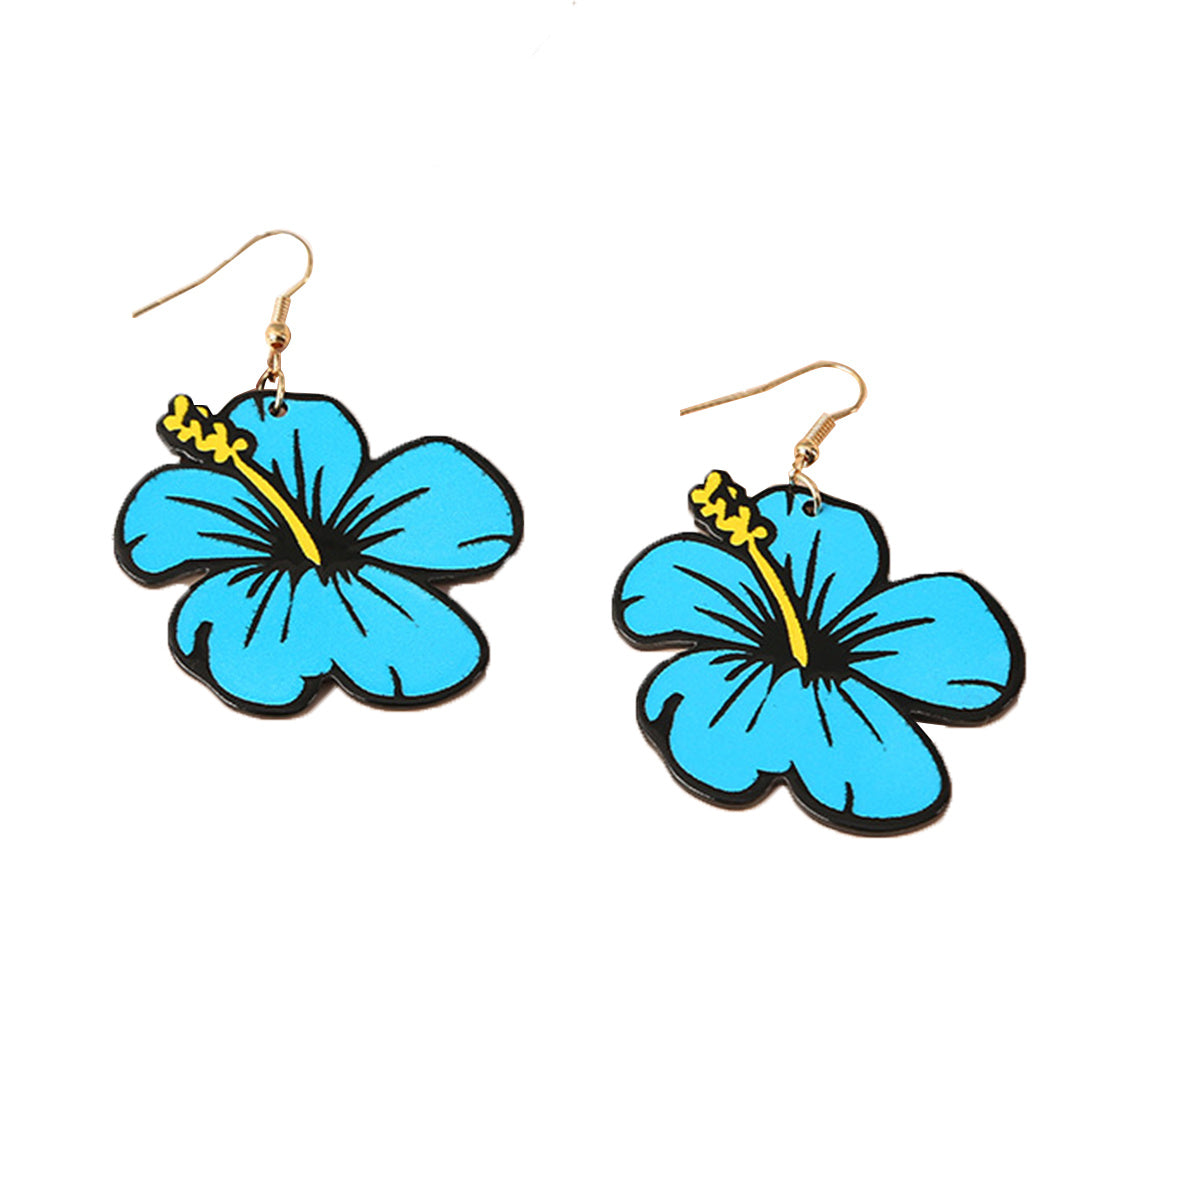 Exaggerated Flower Earrings for Women Girls, Flower Shaped Earrings with Yellow Bud